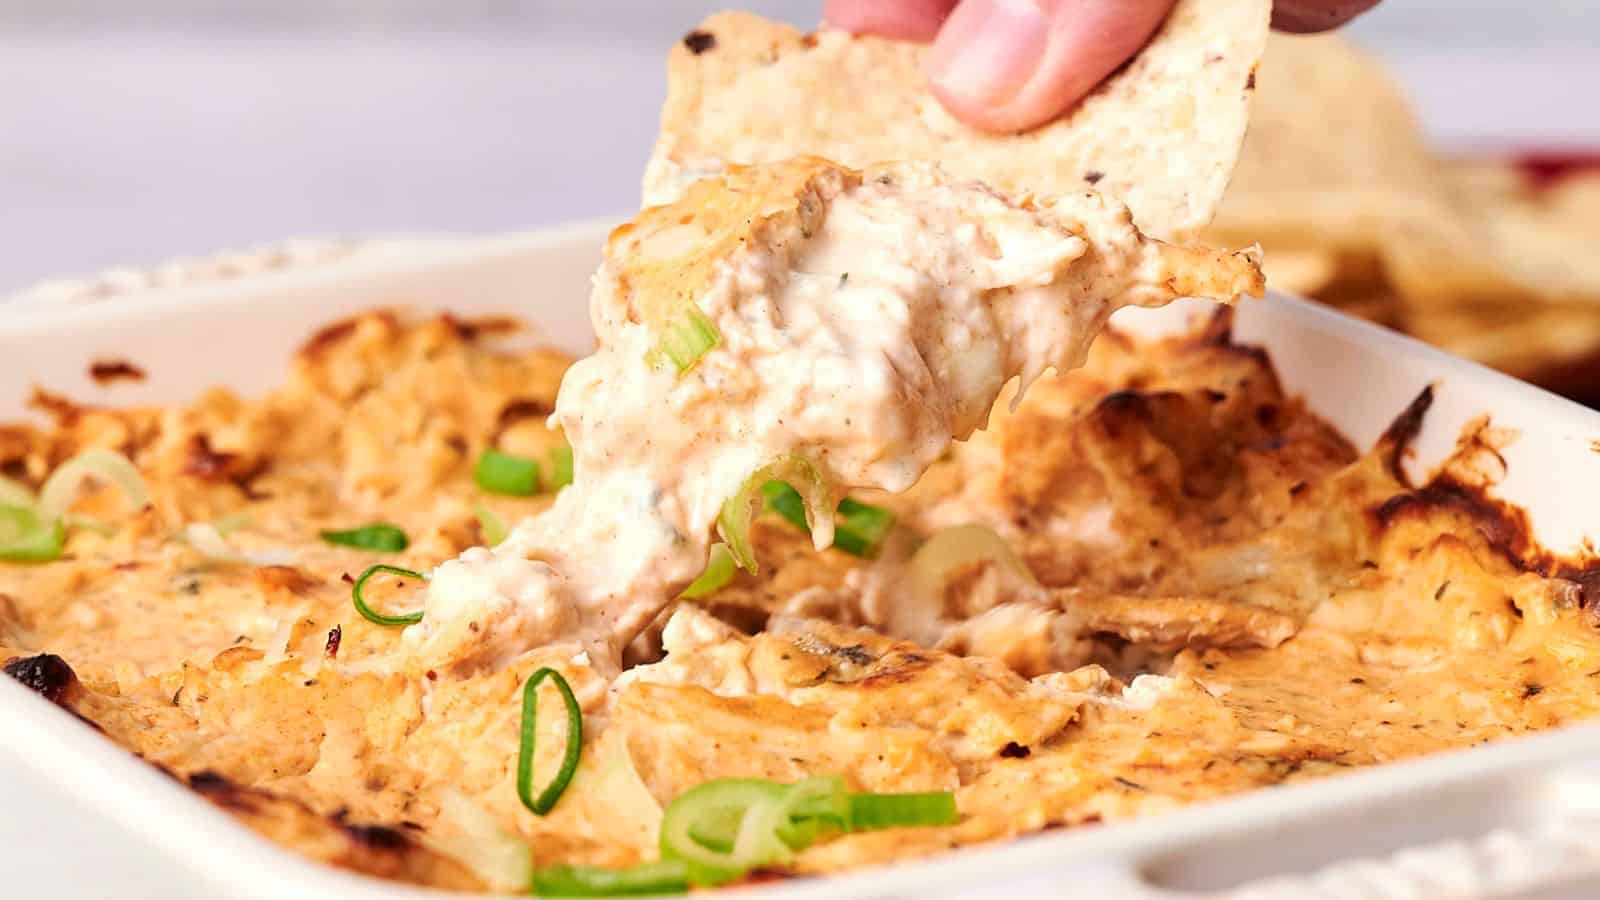 A hand dips a tortilla chip into a cheesy baked dish topped with sliced green onions.